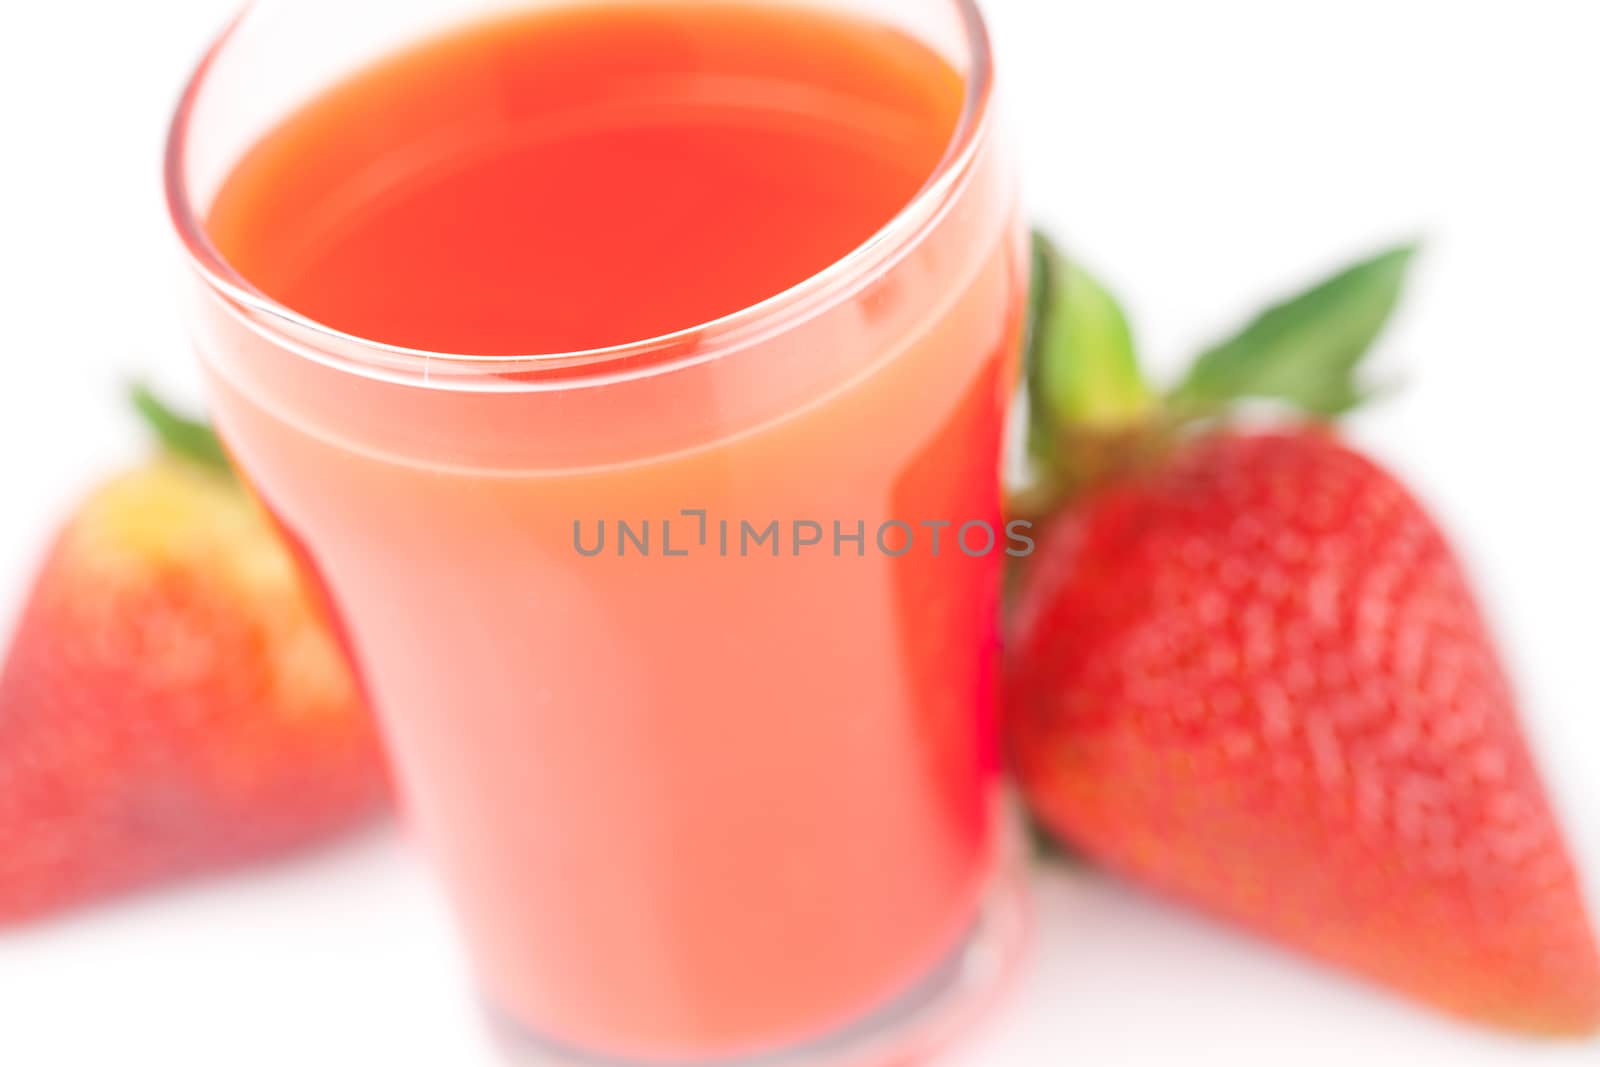 strawberry and a glass of strawberry juice isolated on white